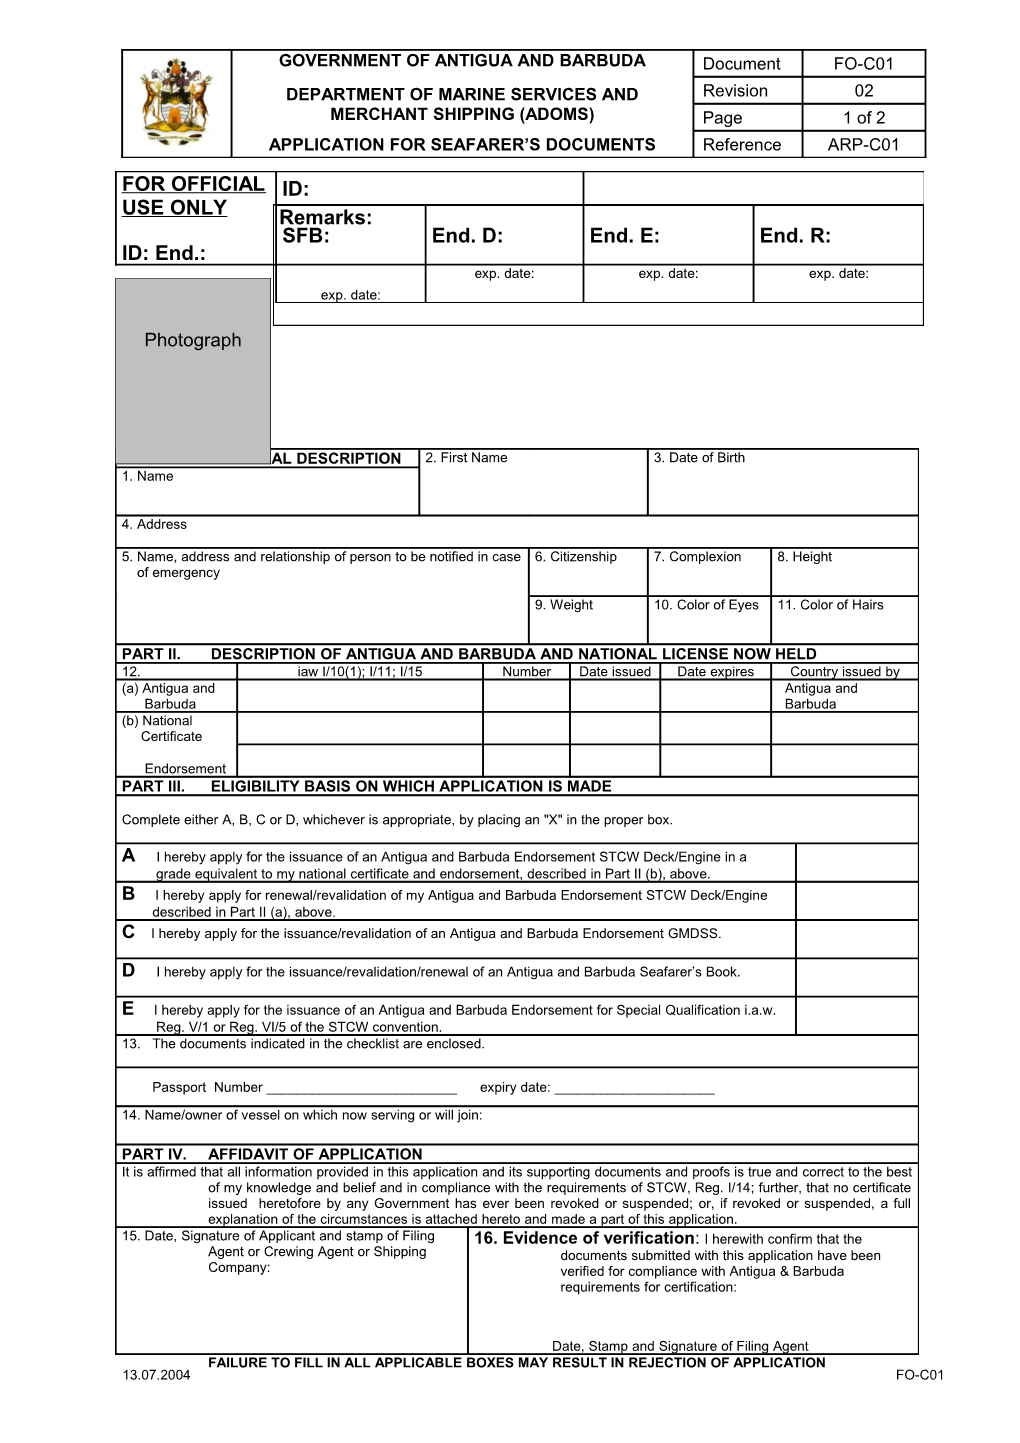 Application for Seafarer's Documents